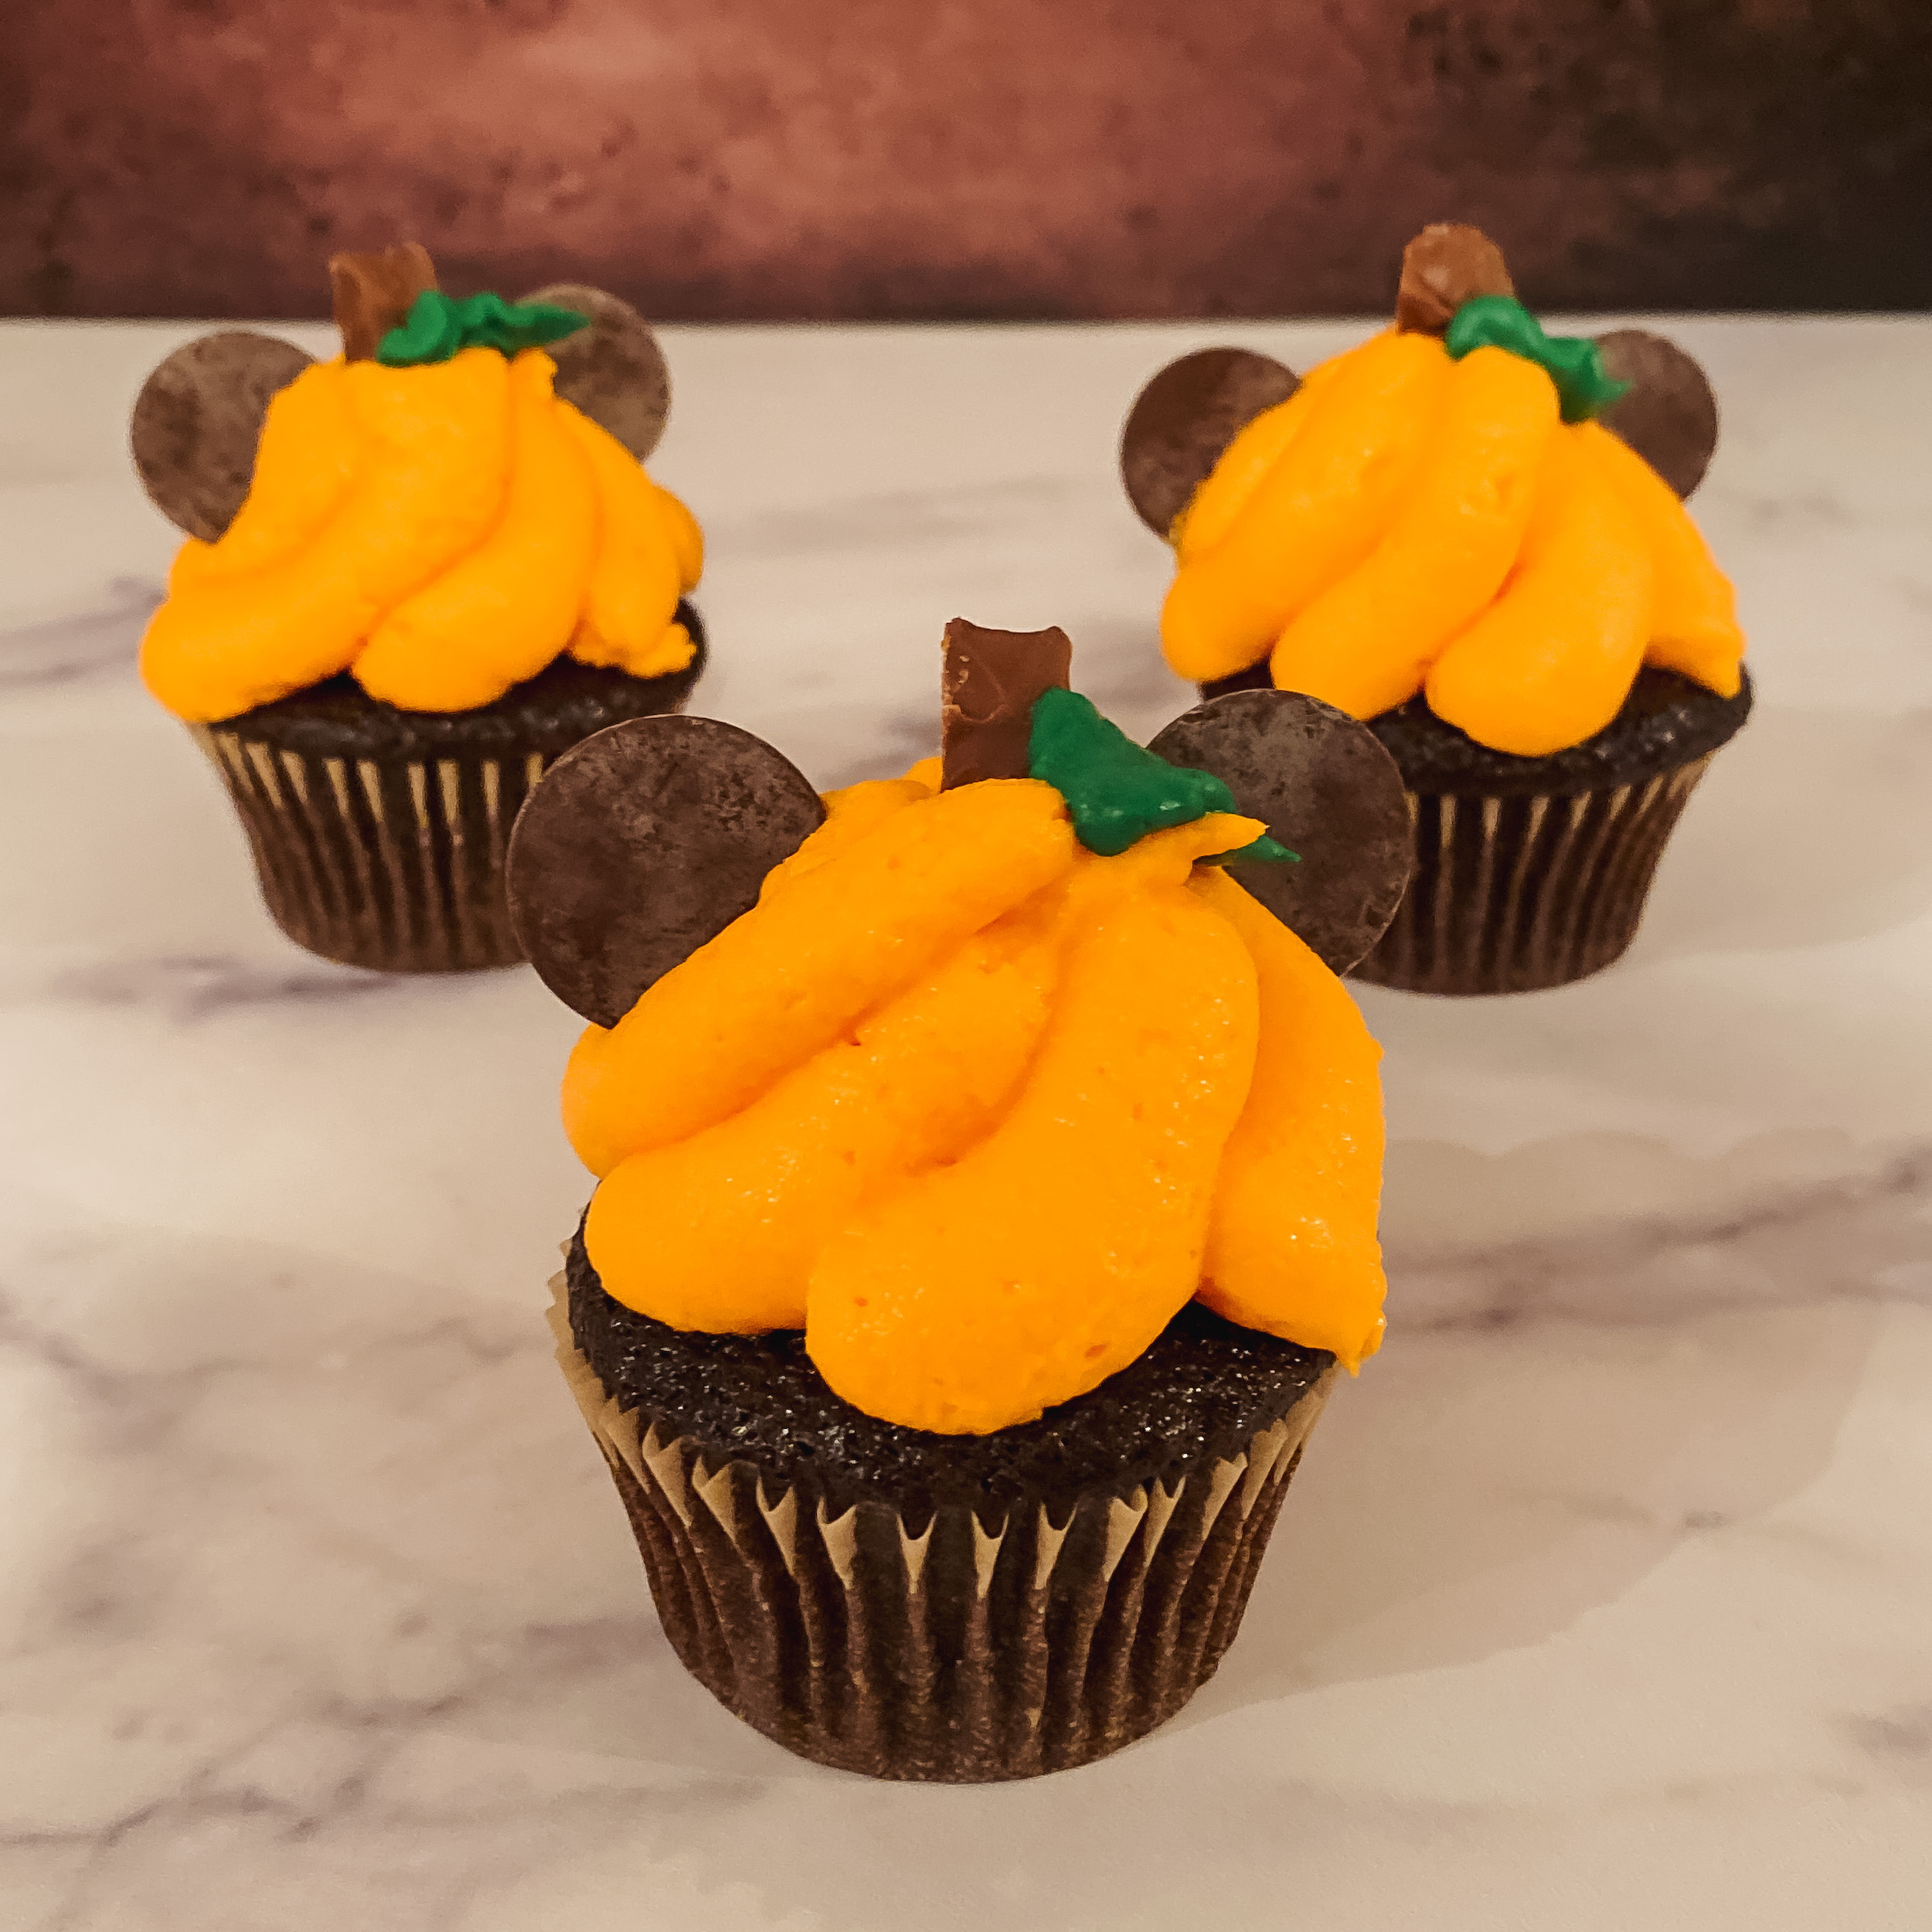 3 Pumpkin Patch Mickey Cupcakes (chocolate cupcakes with orange frosting and chocolate pieces)